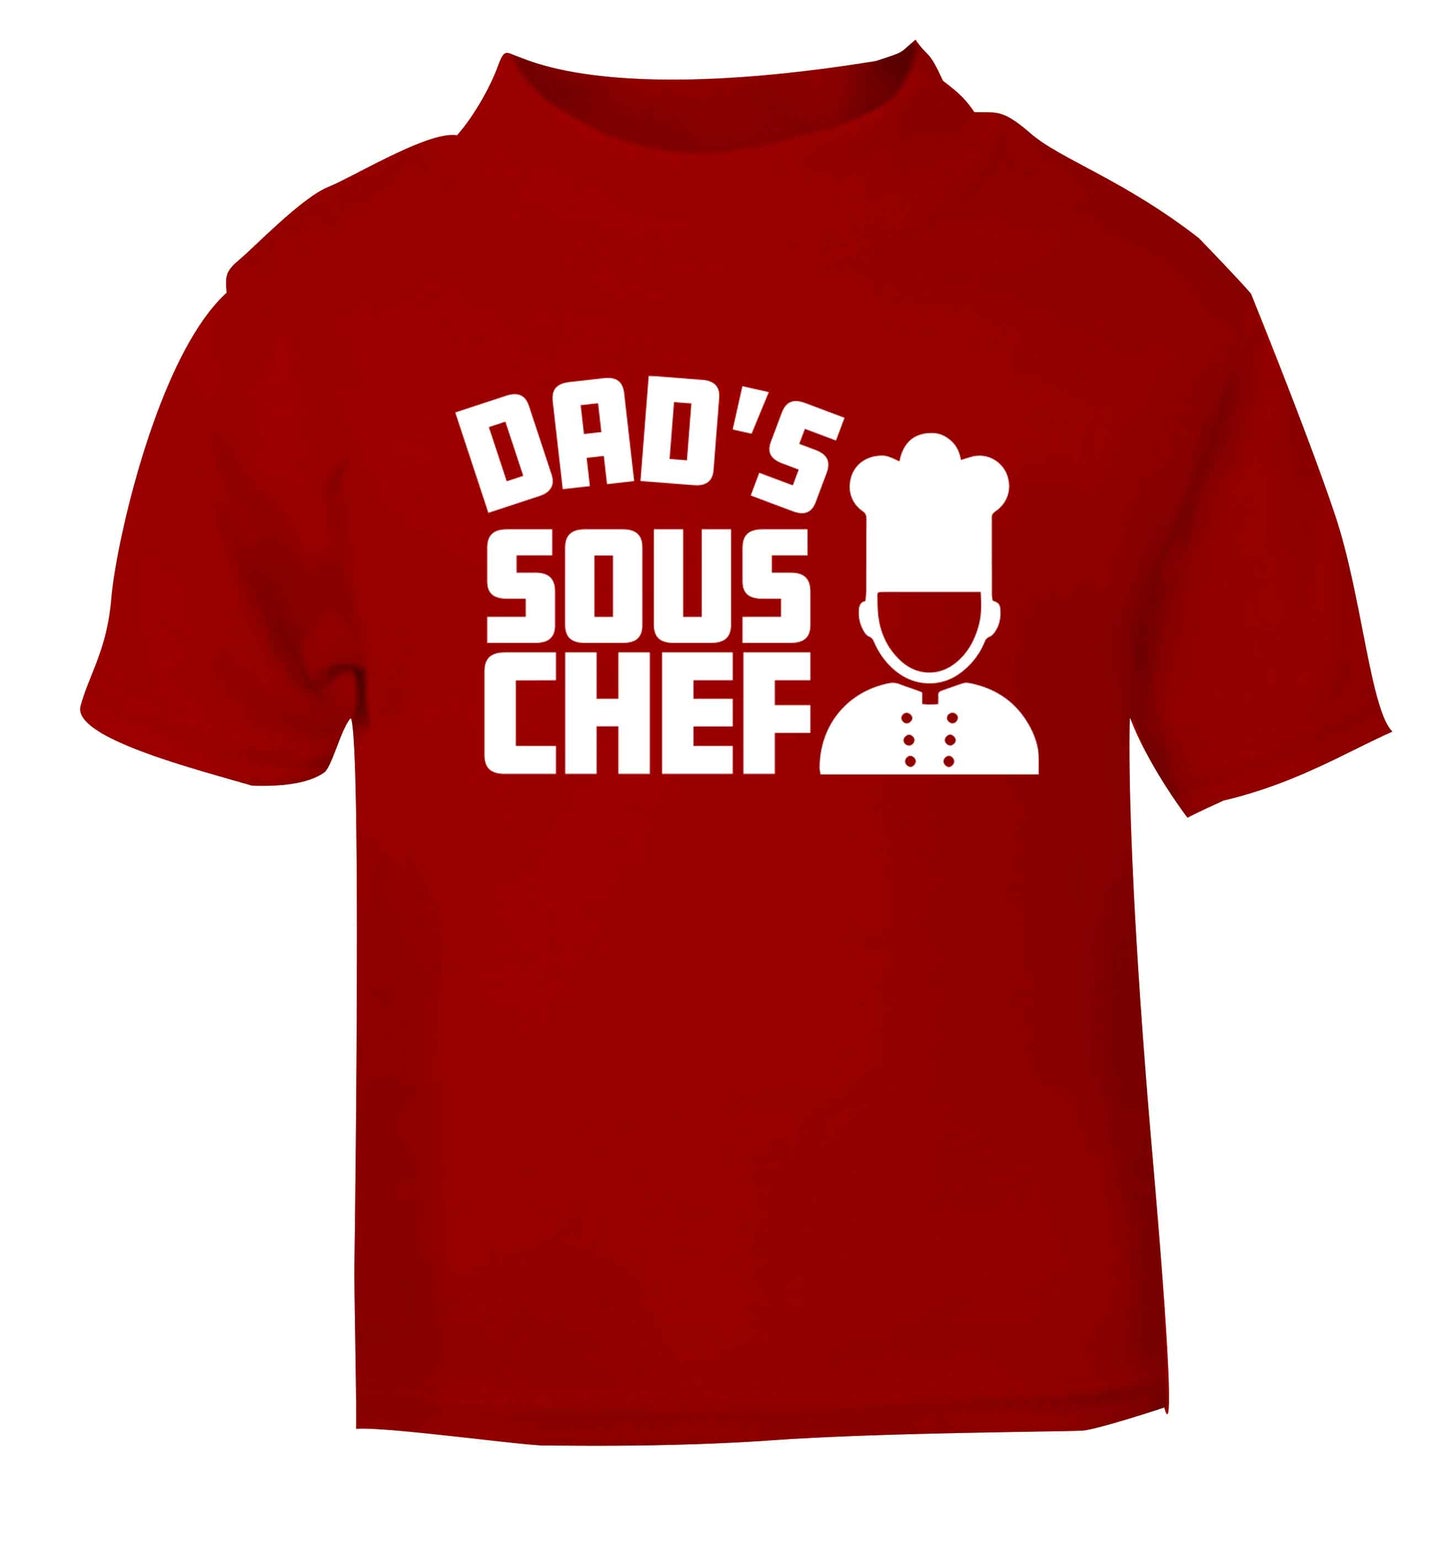 Dad's sous chef red baby toddler Tshirt 2 Years